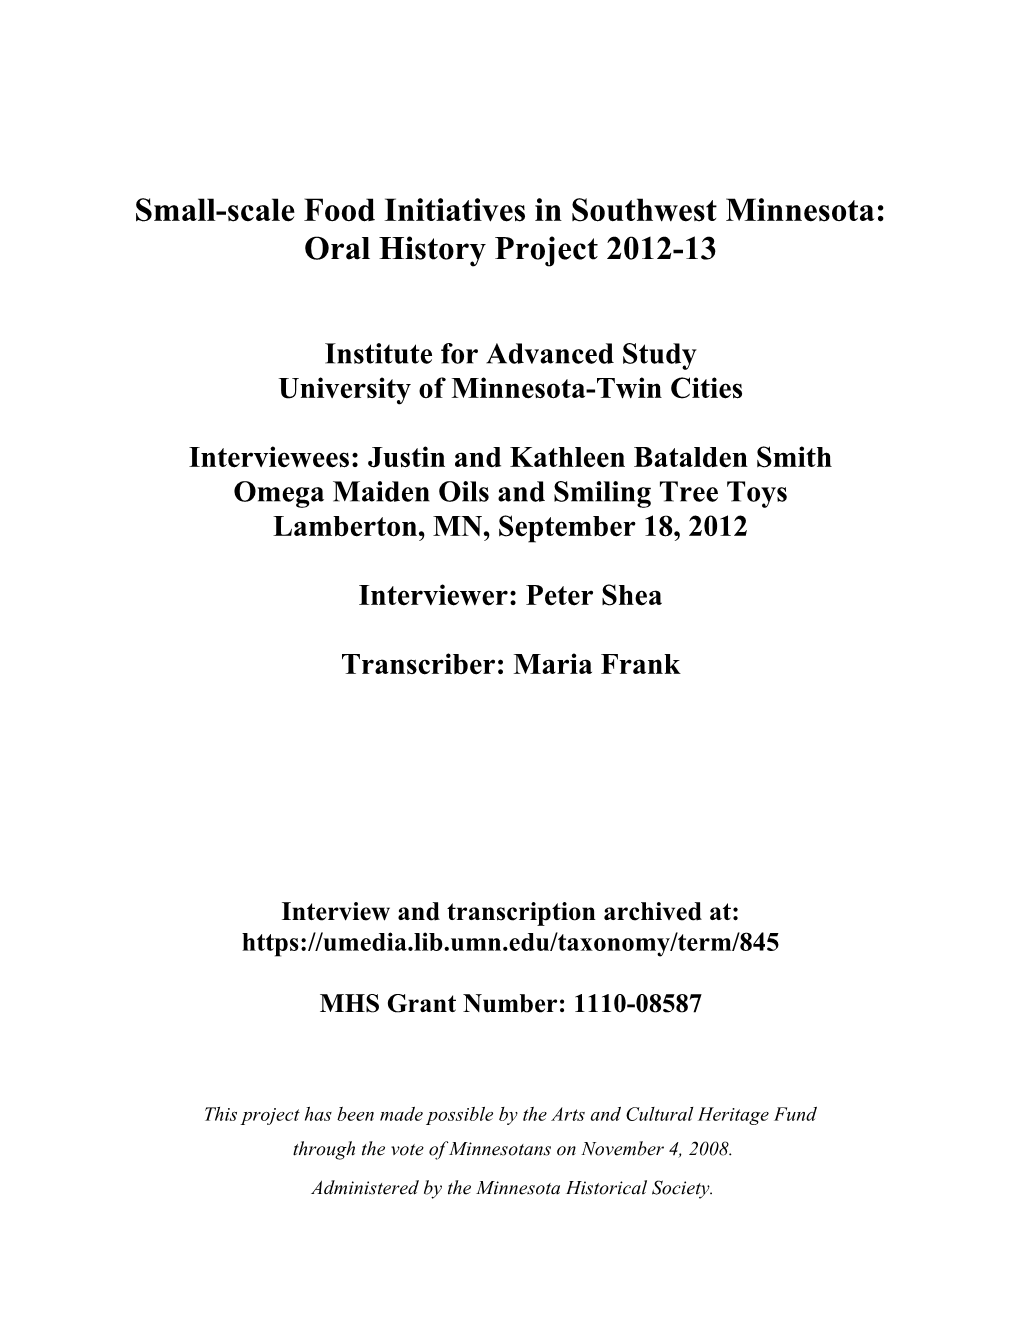 Small-Scale Food Initiatives in Southwest Minnesota